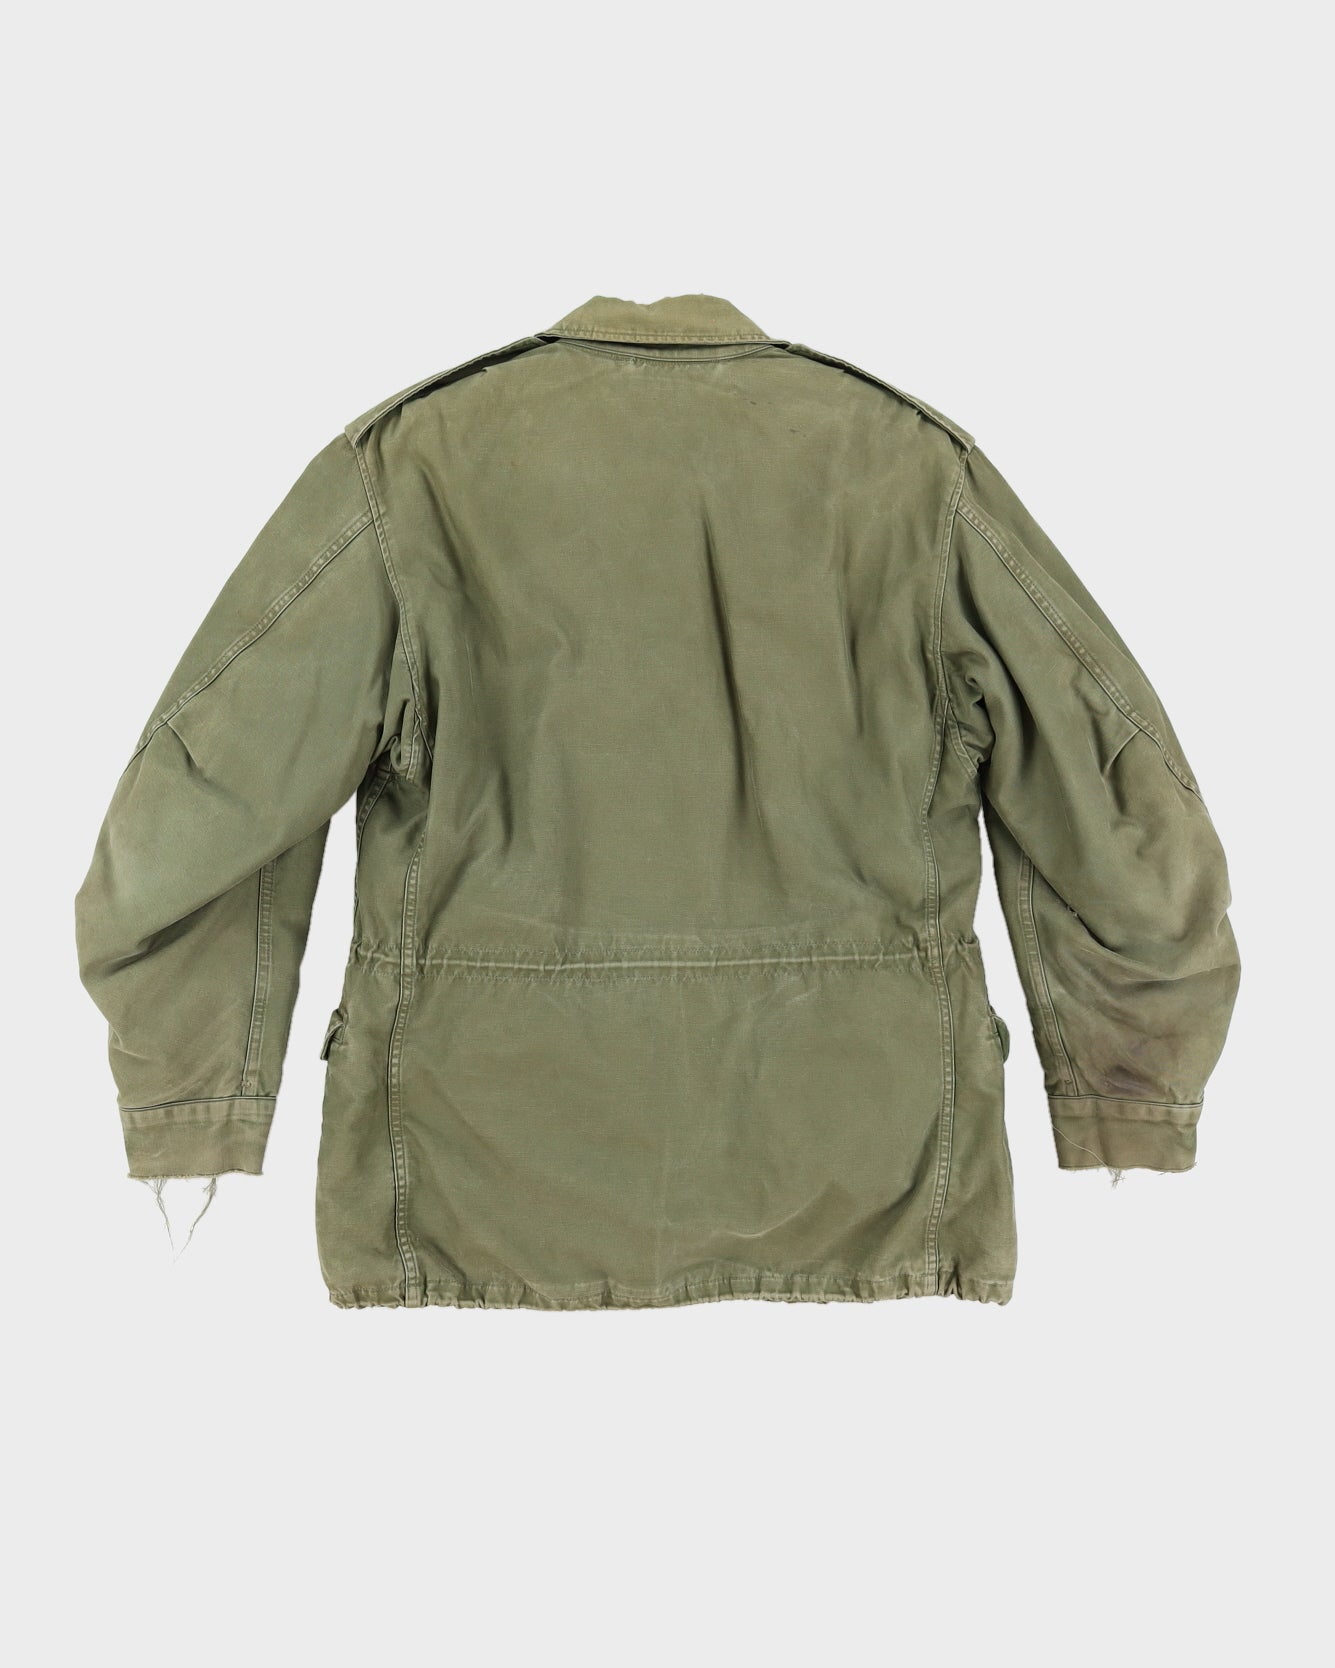 60s US Army M51 Field Jacket & Liner - S